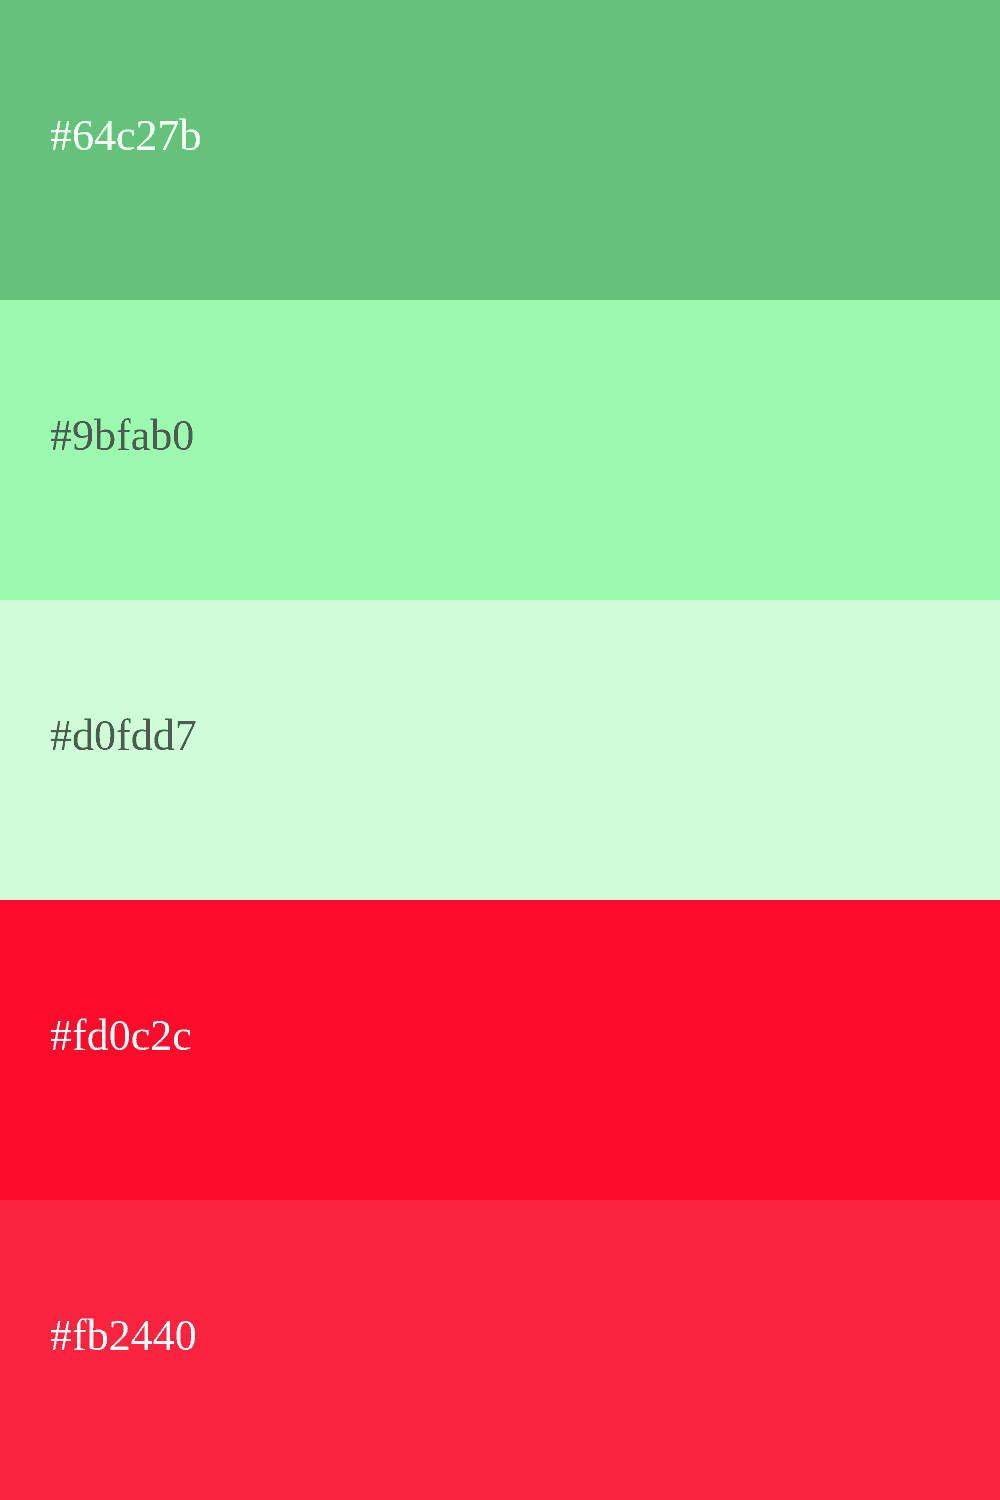 mint green and red